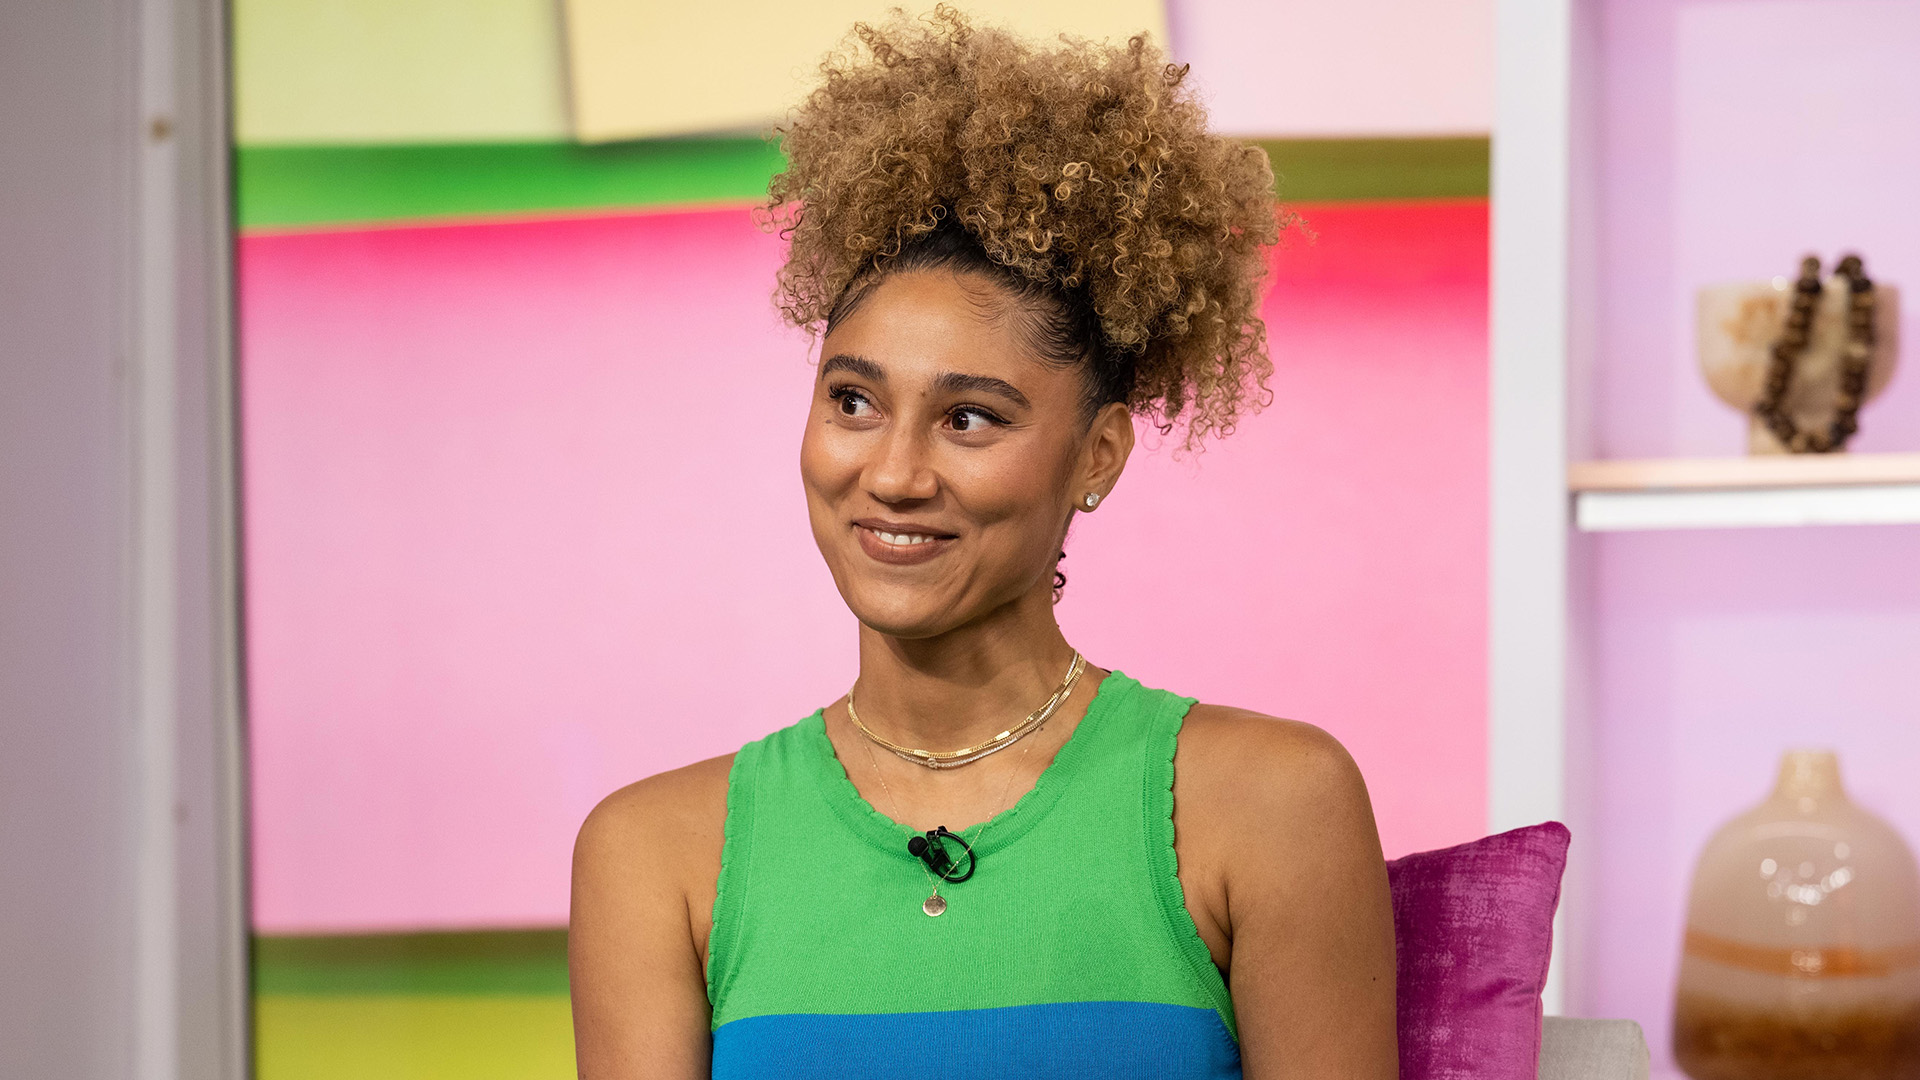 Ally Love on her journey of confidence and acceptance with her hair